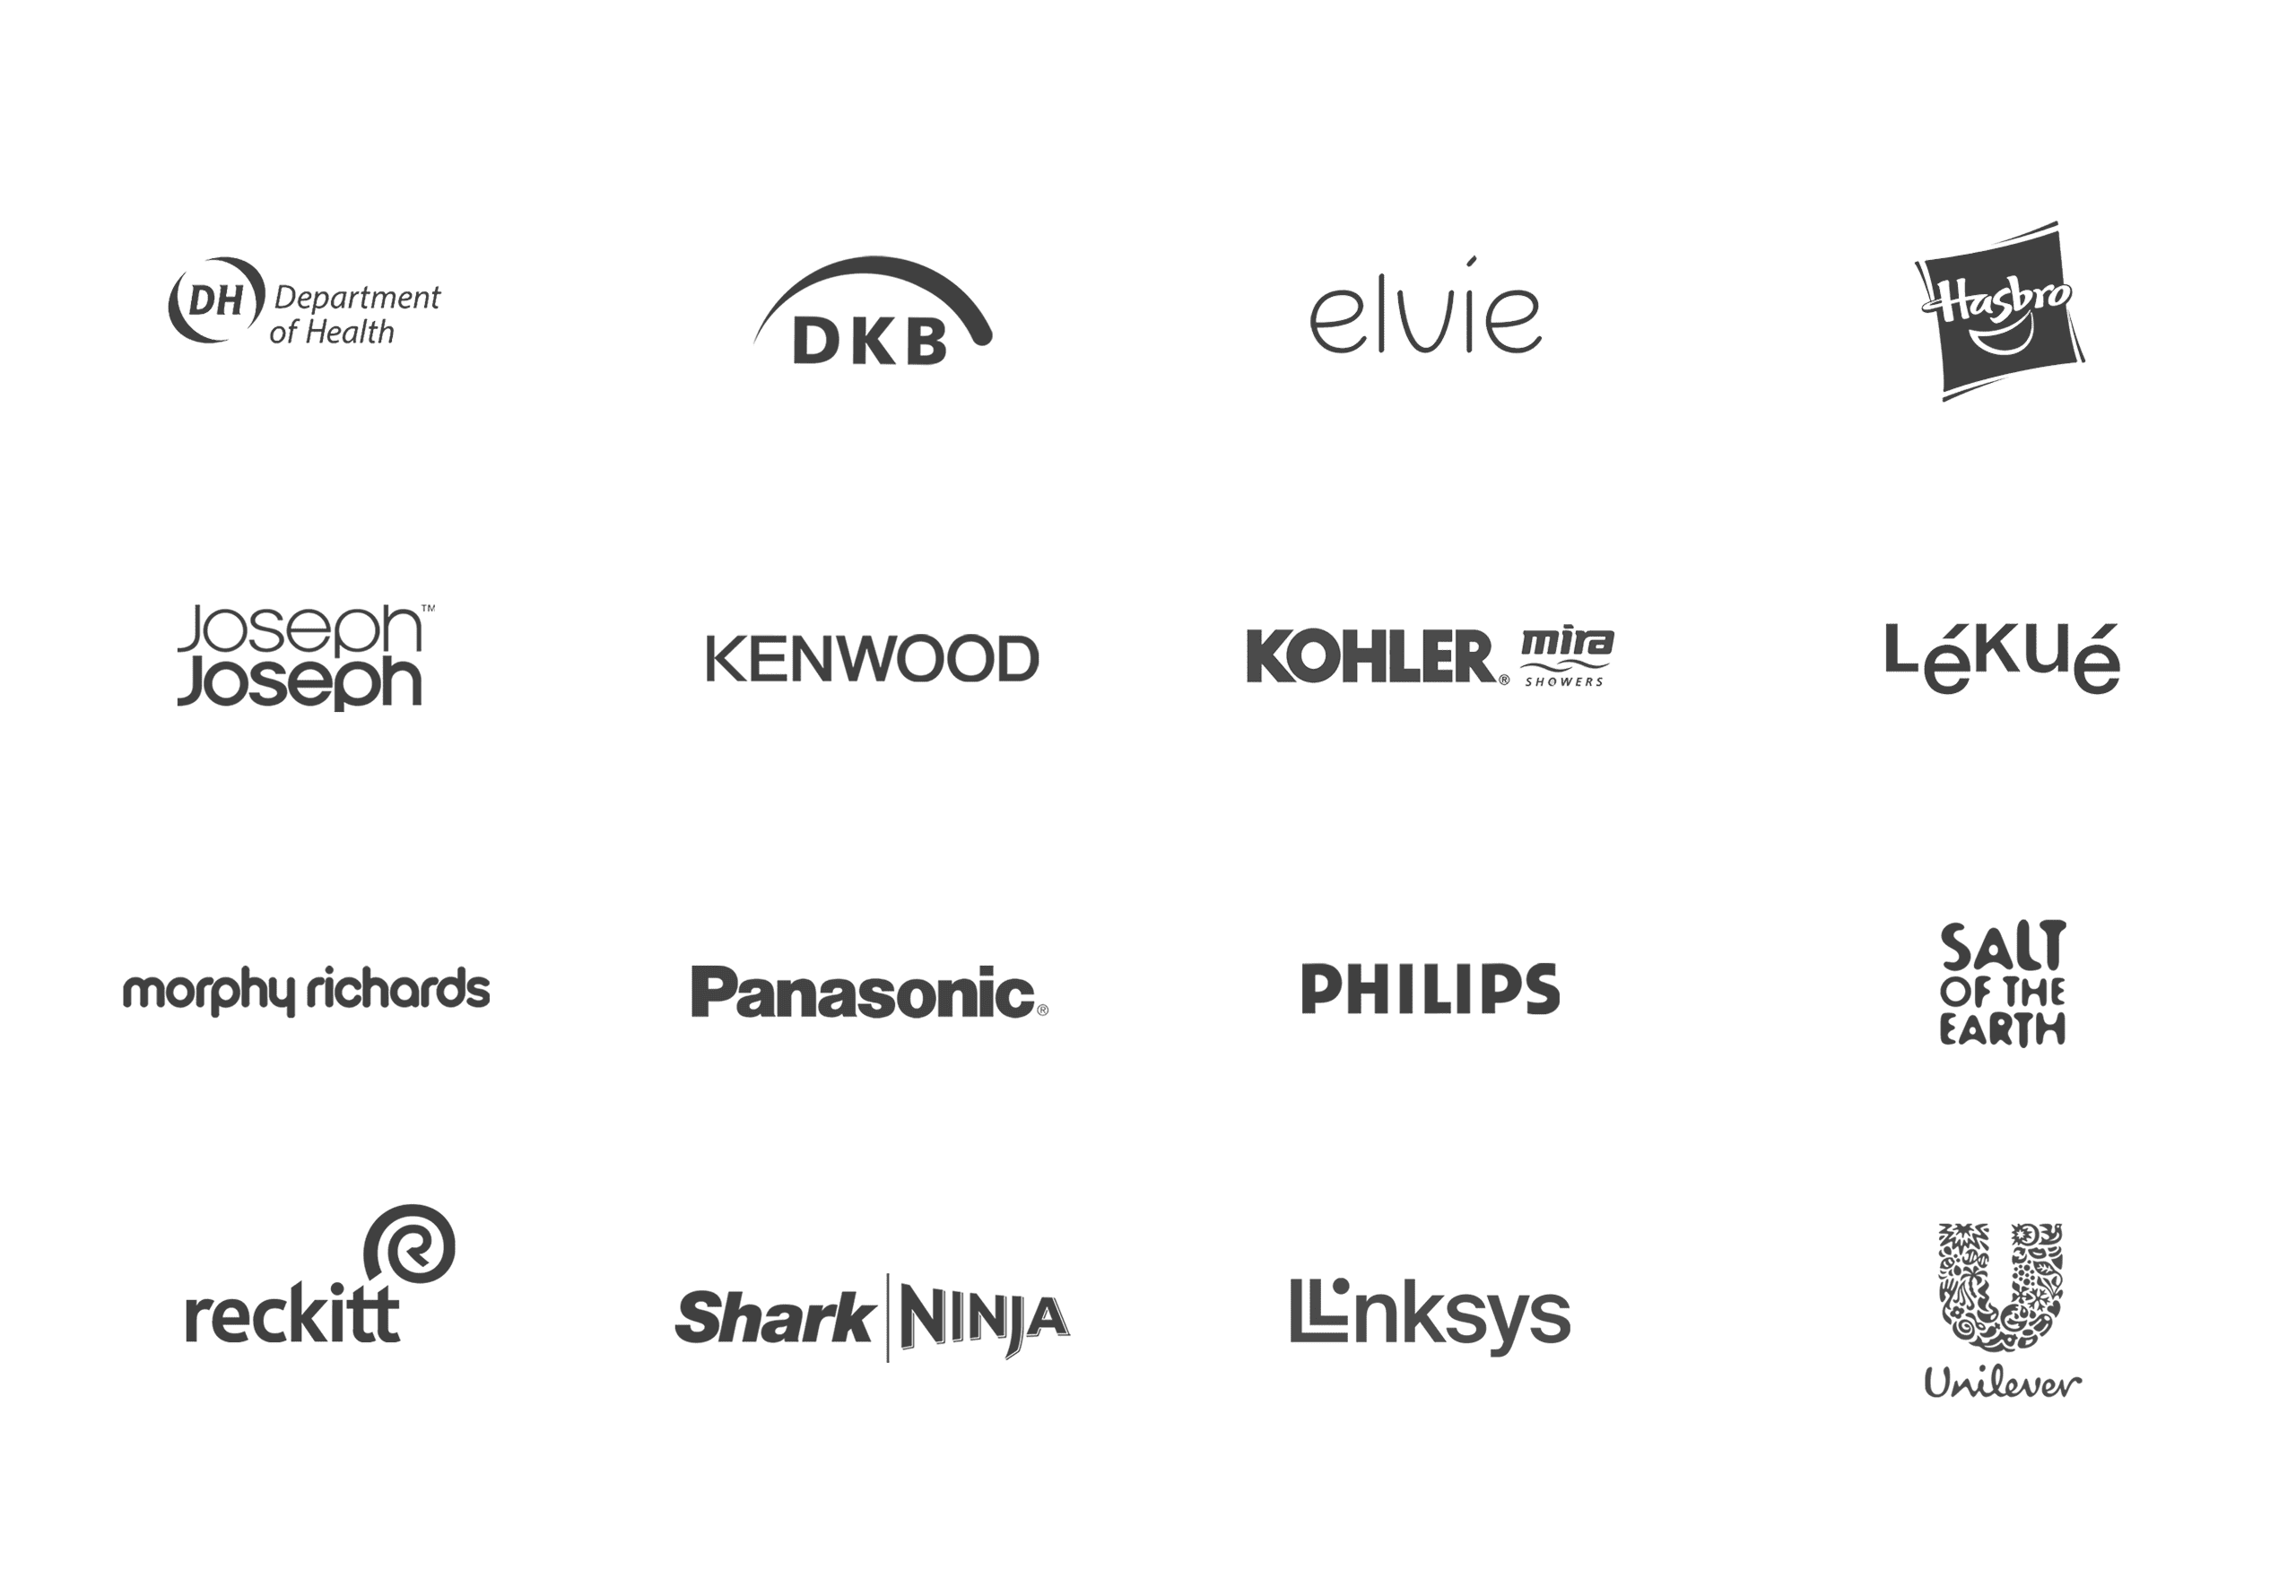 Rodd are a trusted strategic design and innovation studio working within the ‘inner circle’ of some of the world’s leading consumer product businesses. Here are some of the brands we are proud to call clients.